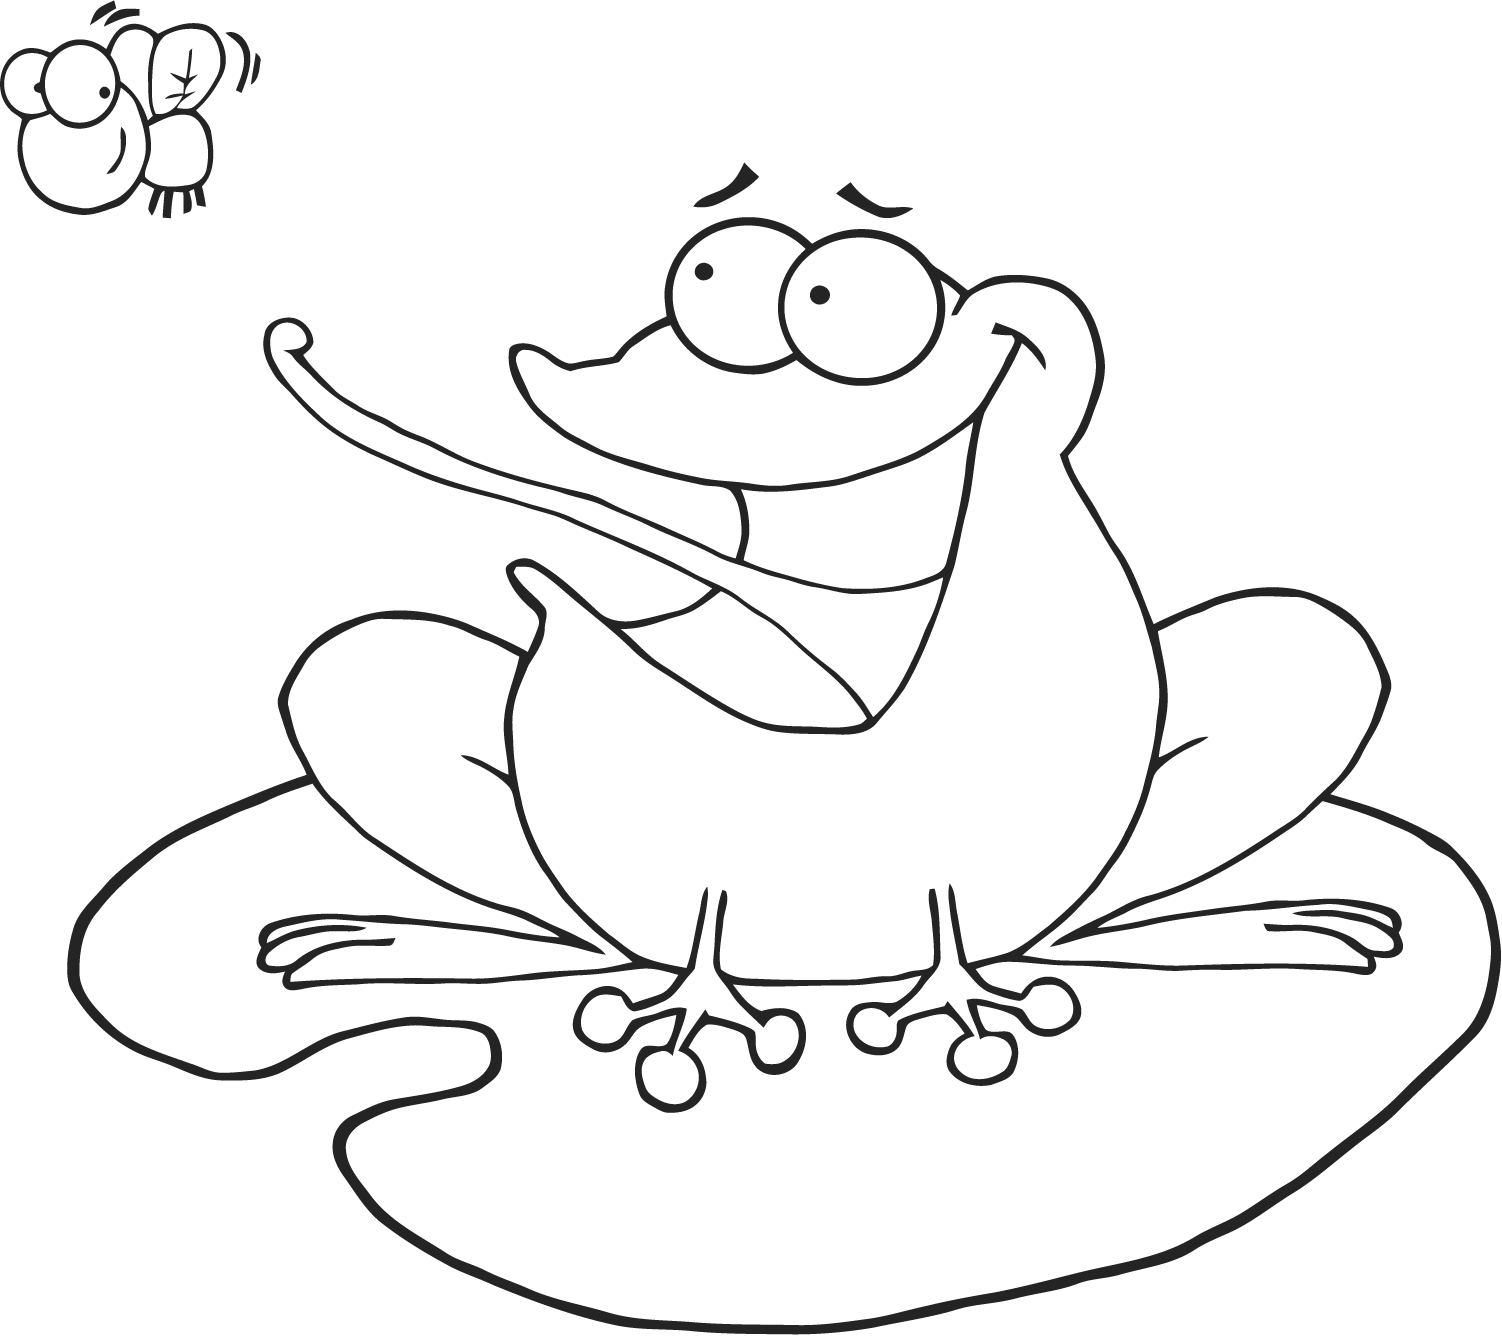 frog catching a fly coloring pages printable pictures : - Coloring ...